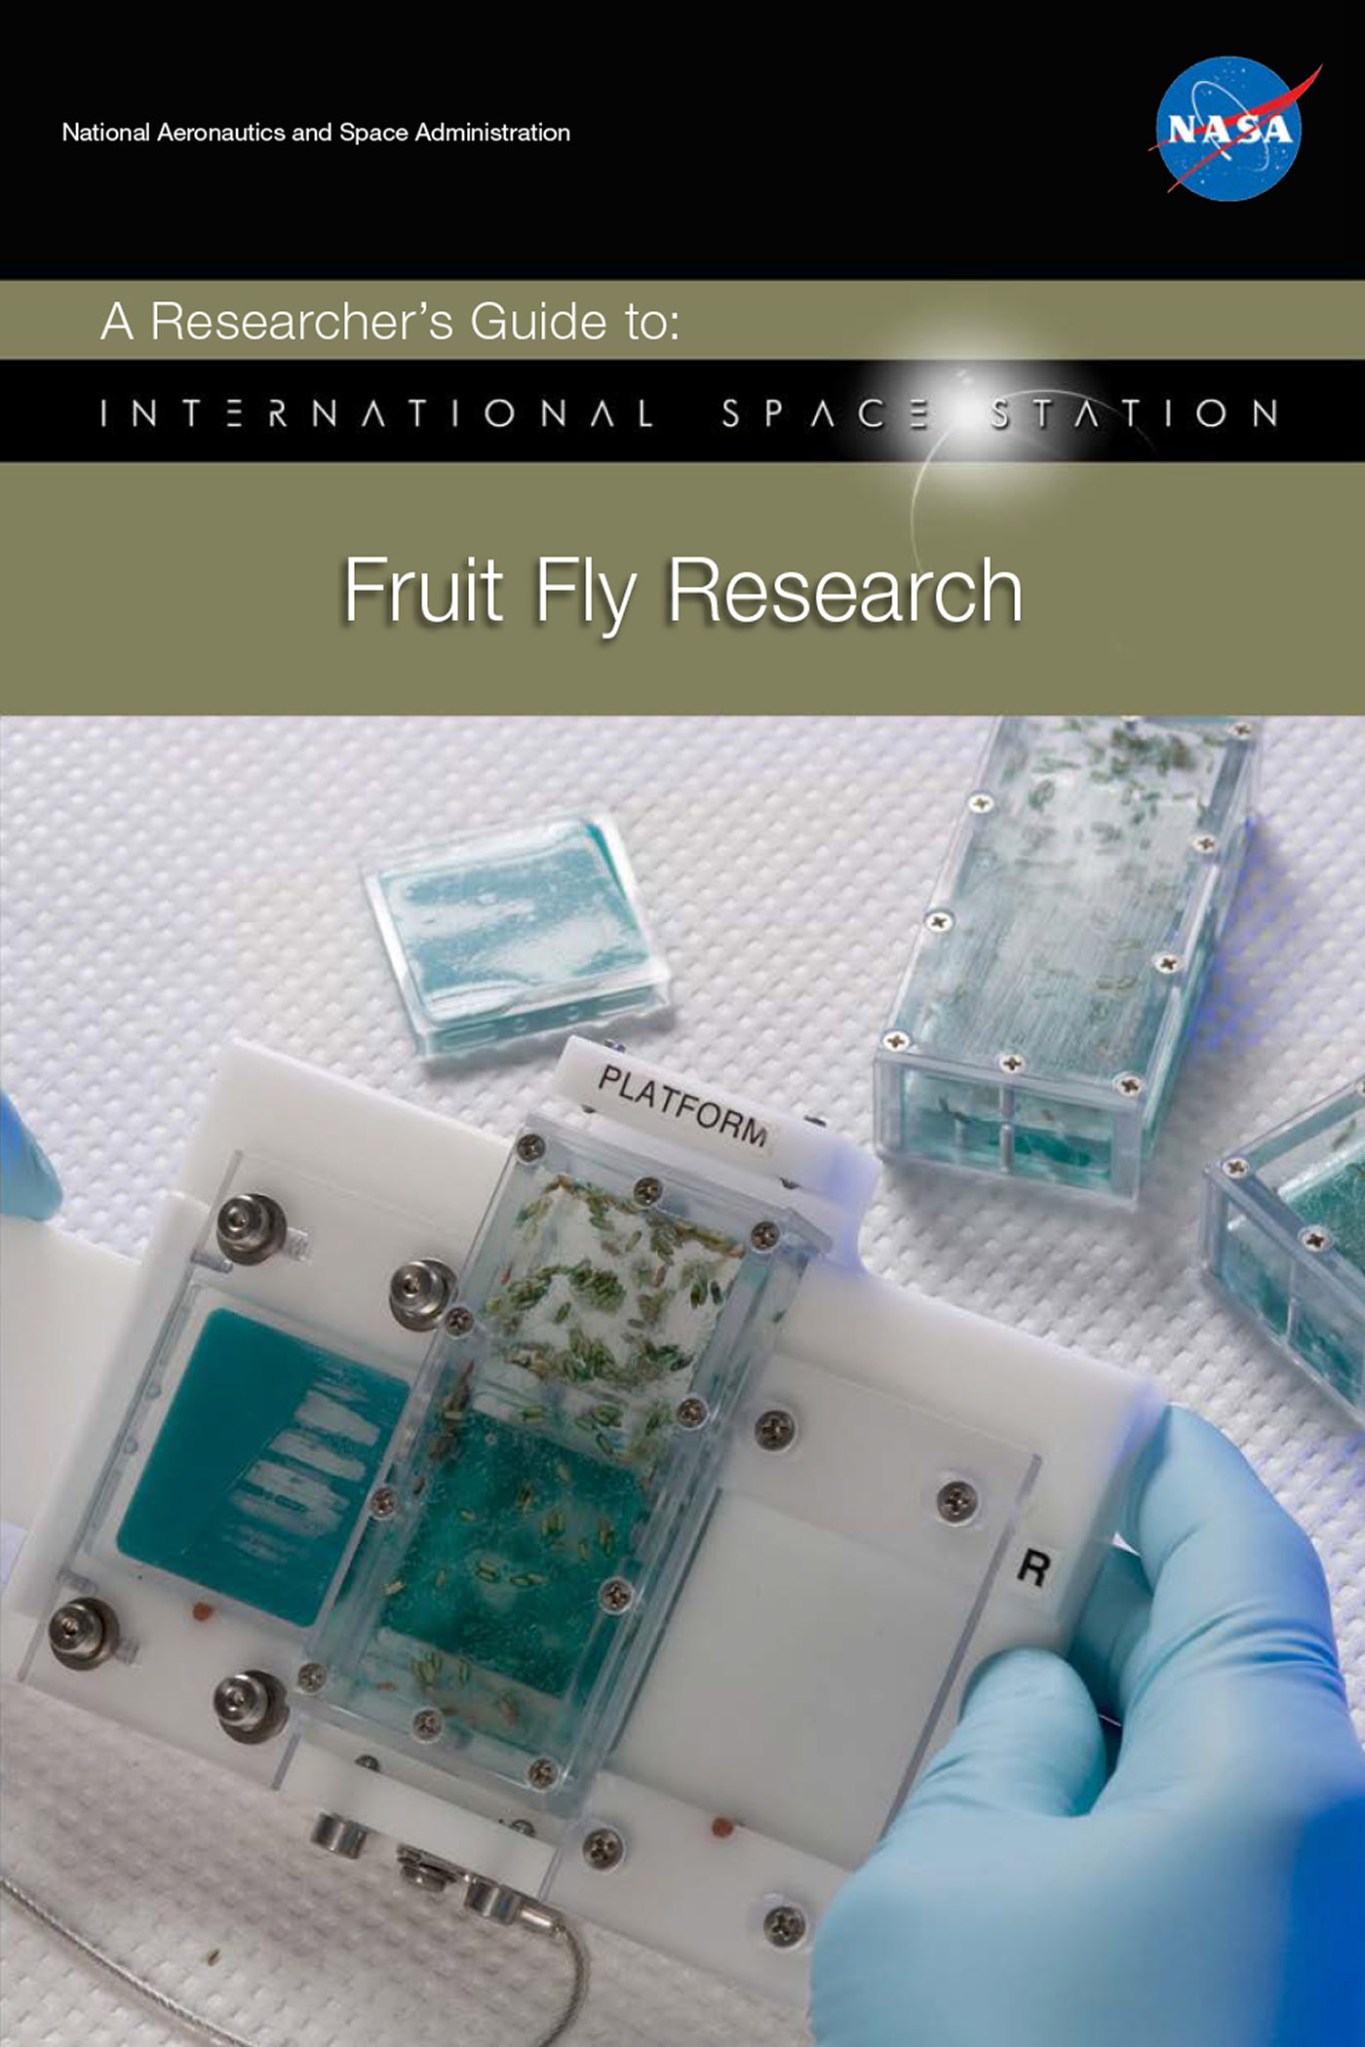 A Researcher’s Guide to: Fruit Fly Research